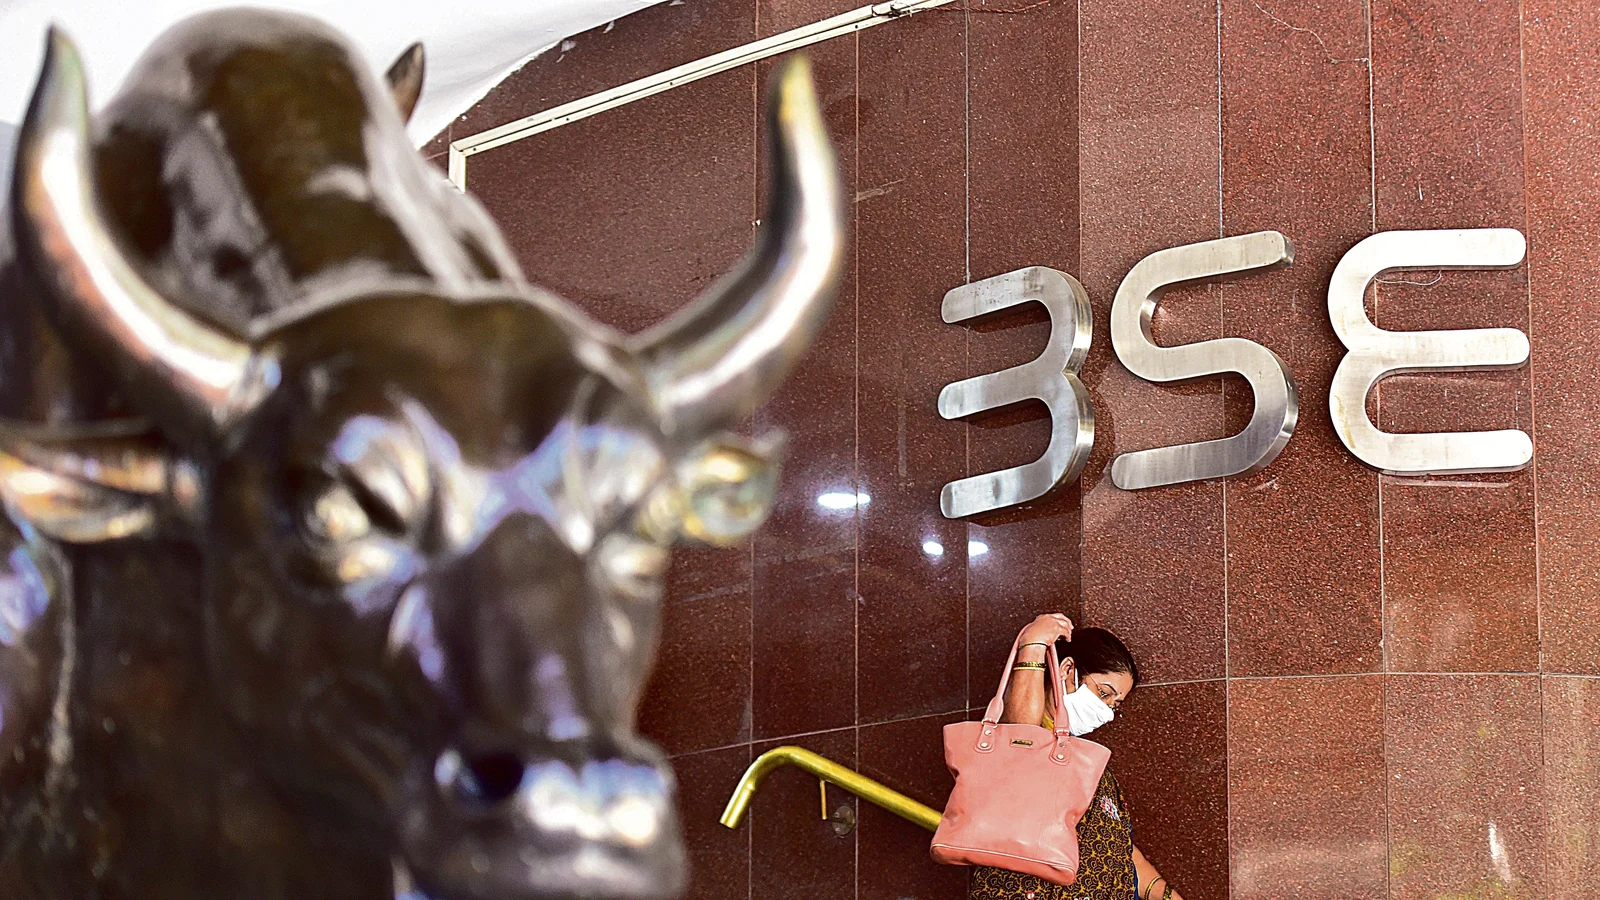 Sensex opens 280 points higher at over 53,000, Nifty rises 93 points to 15,928